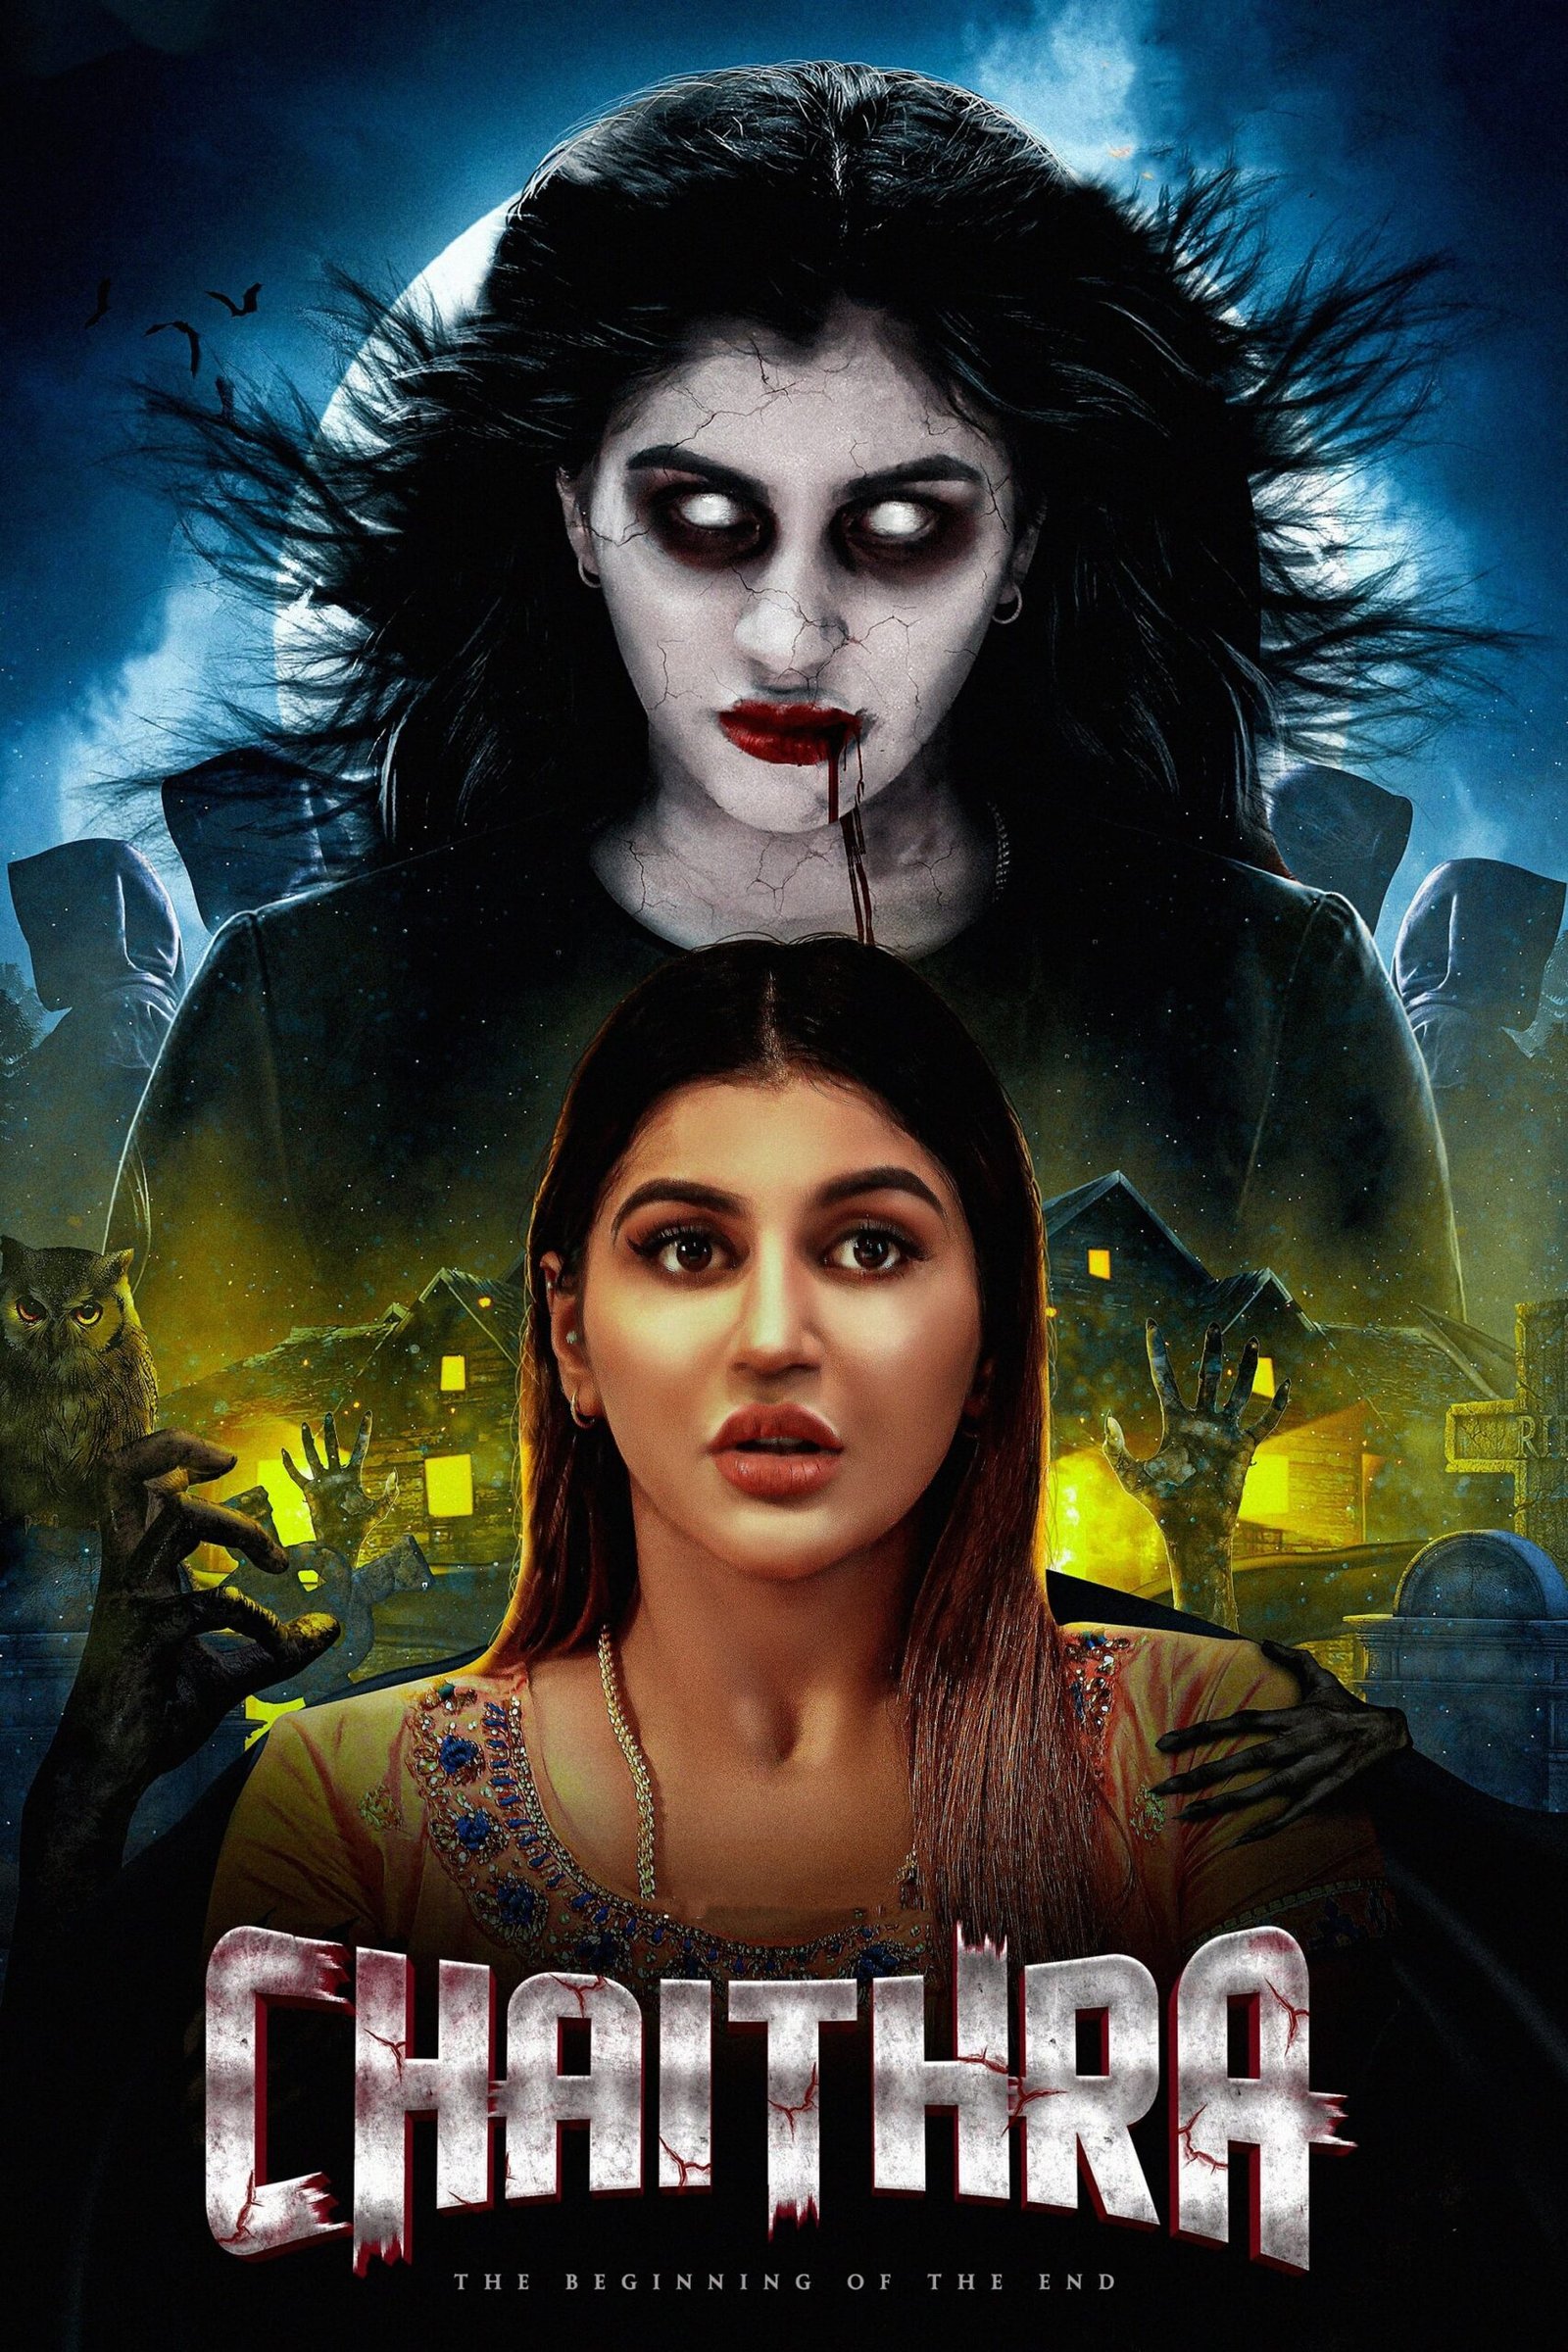 Poster for the movie "Chaitra"